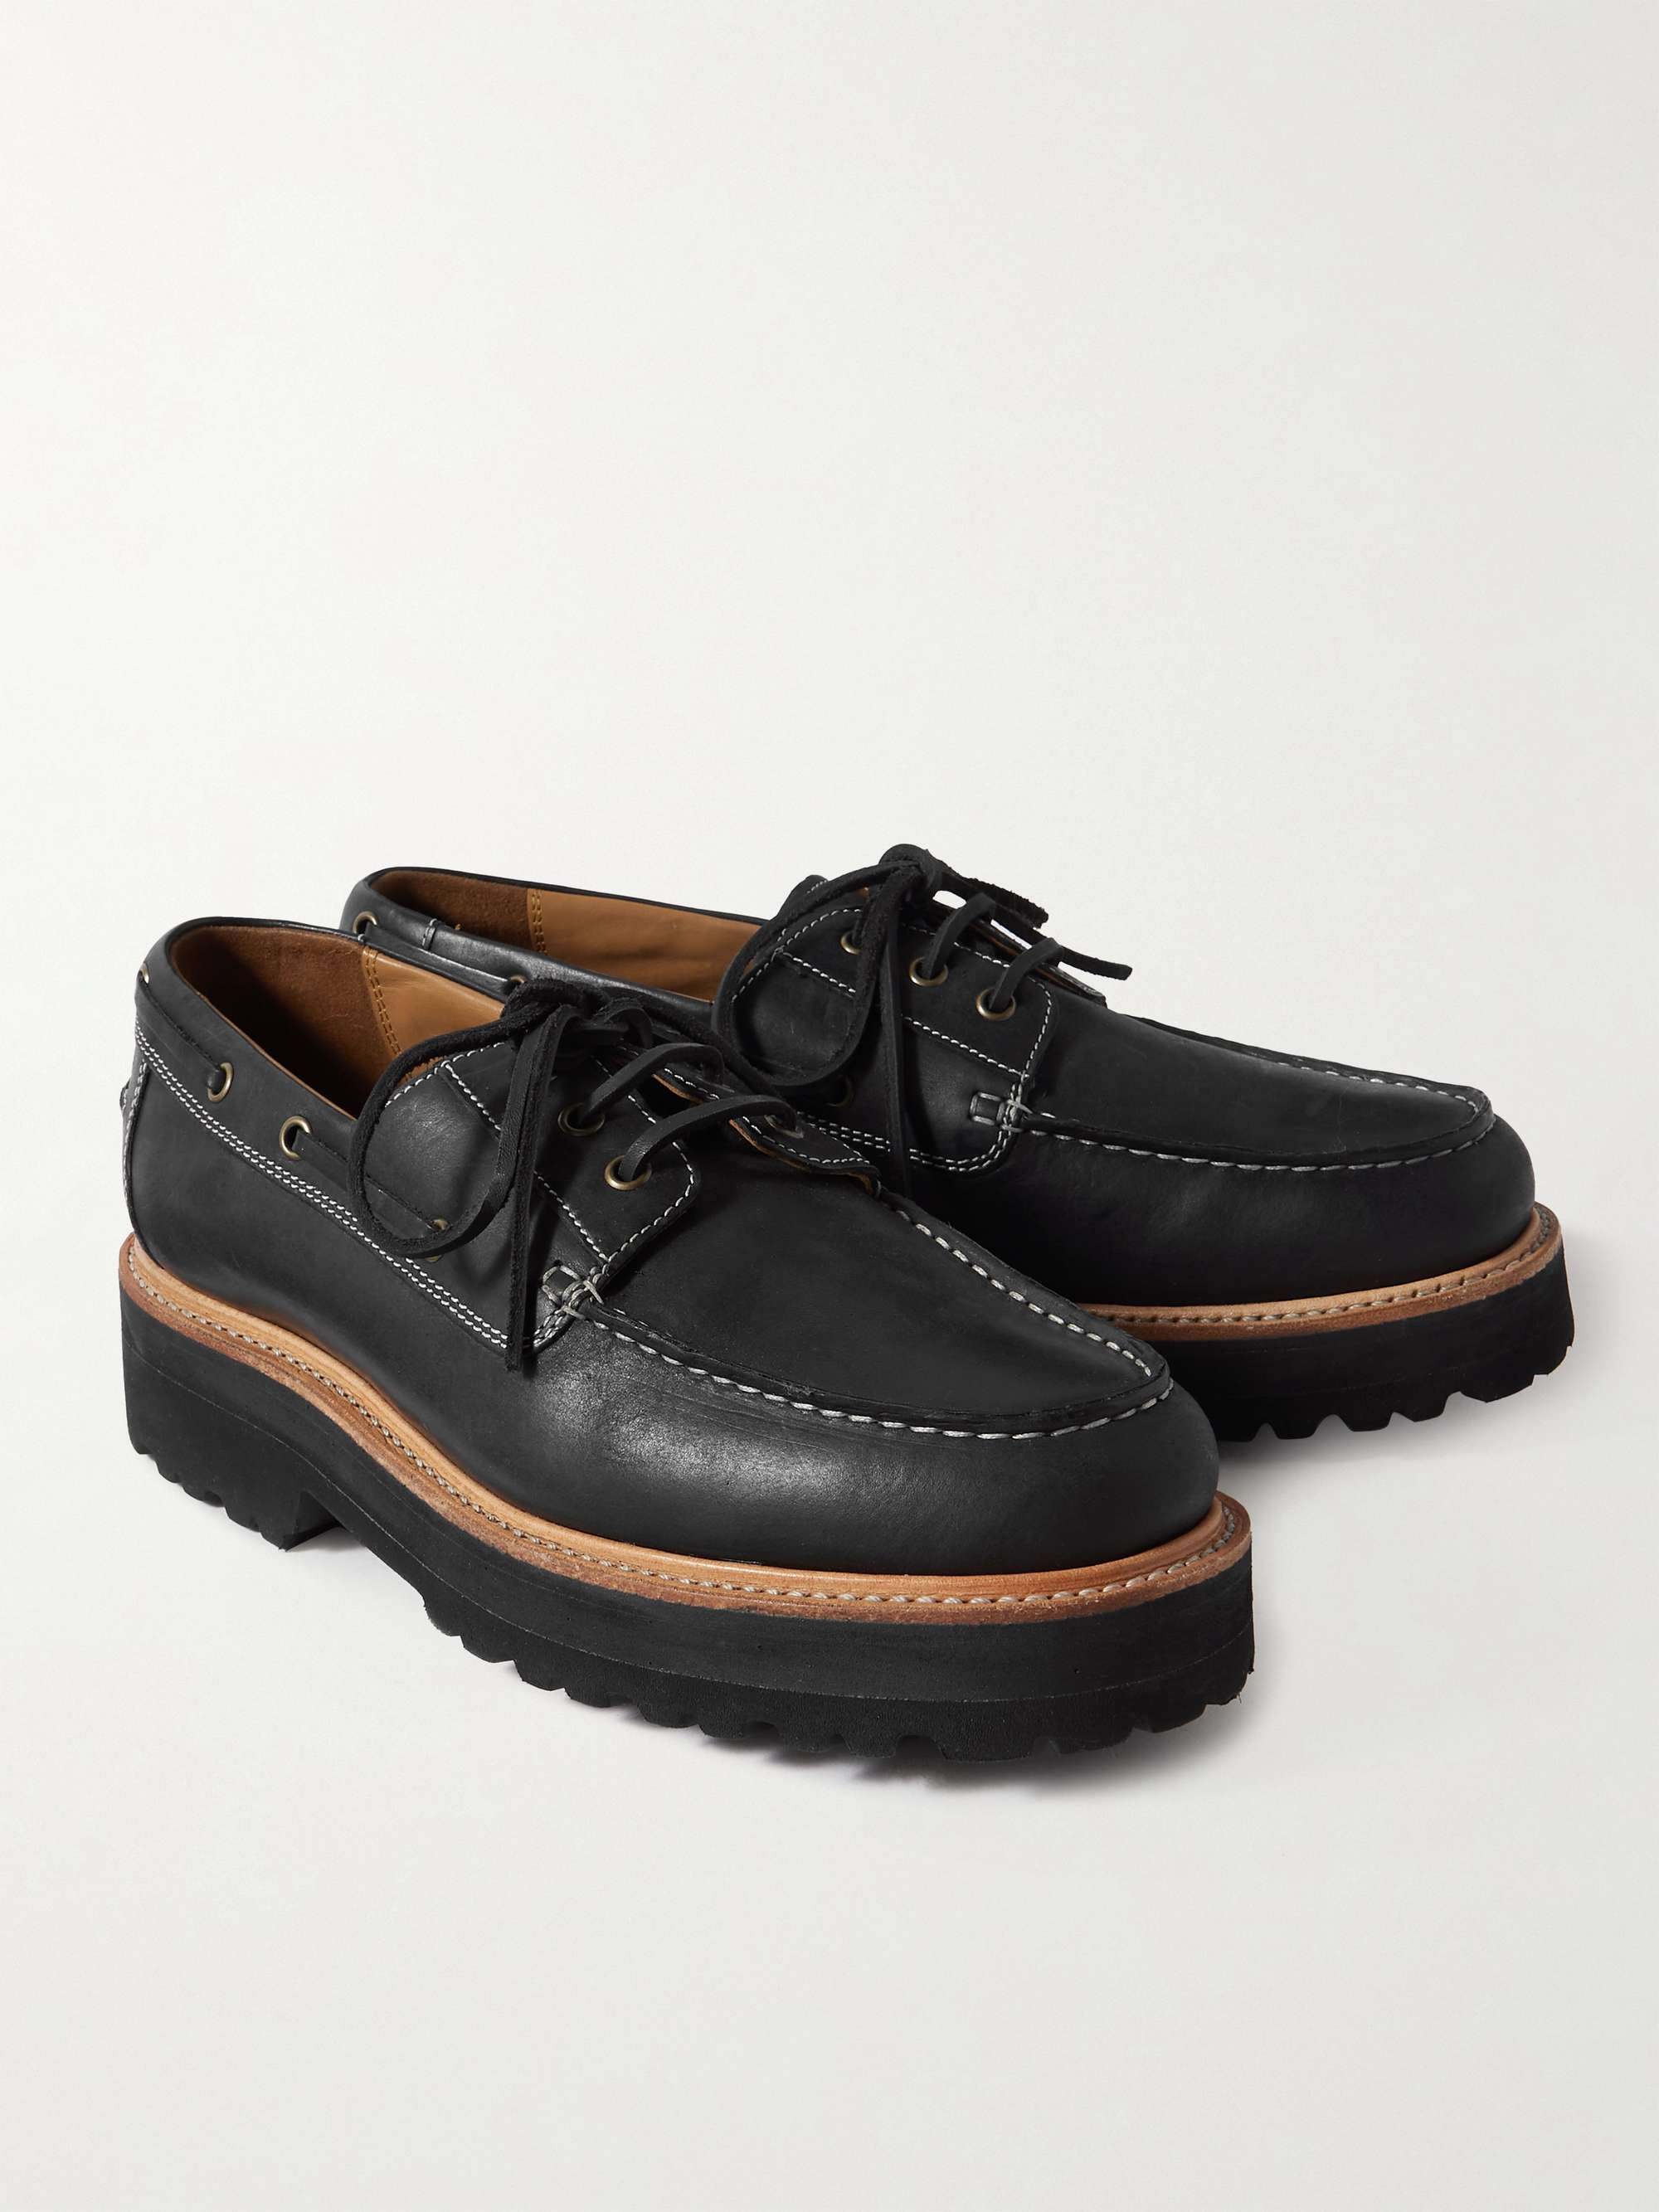 GRENSON Demspey Leather Boat Shoes